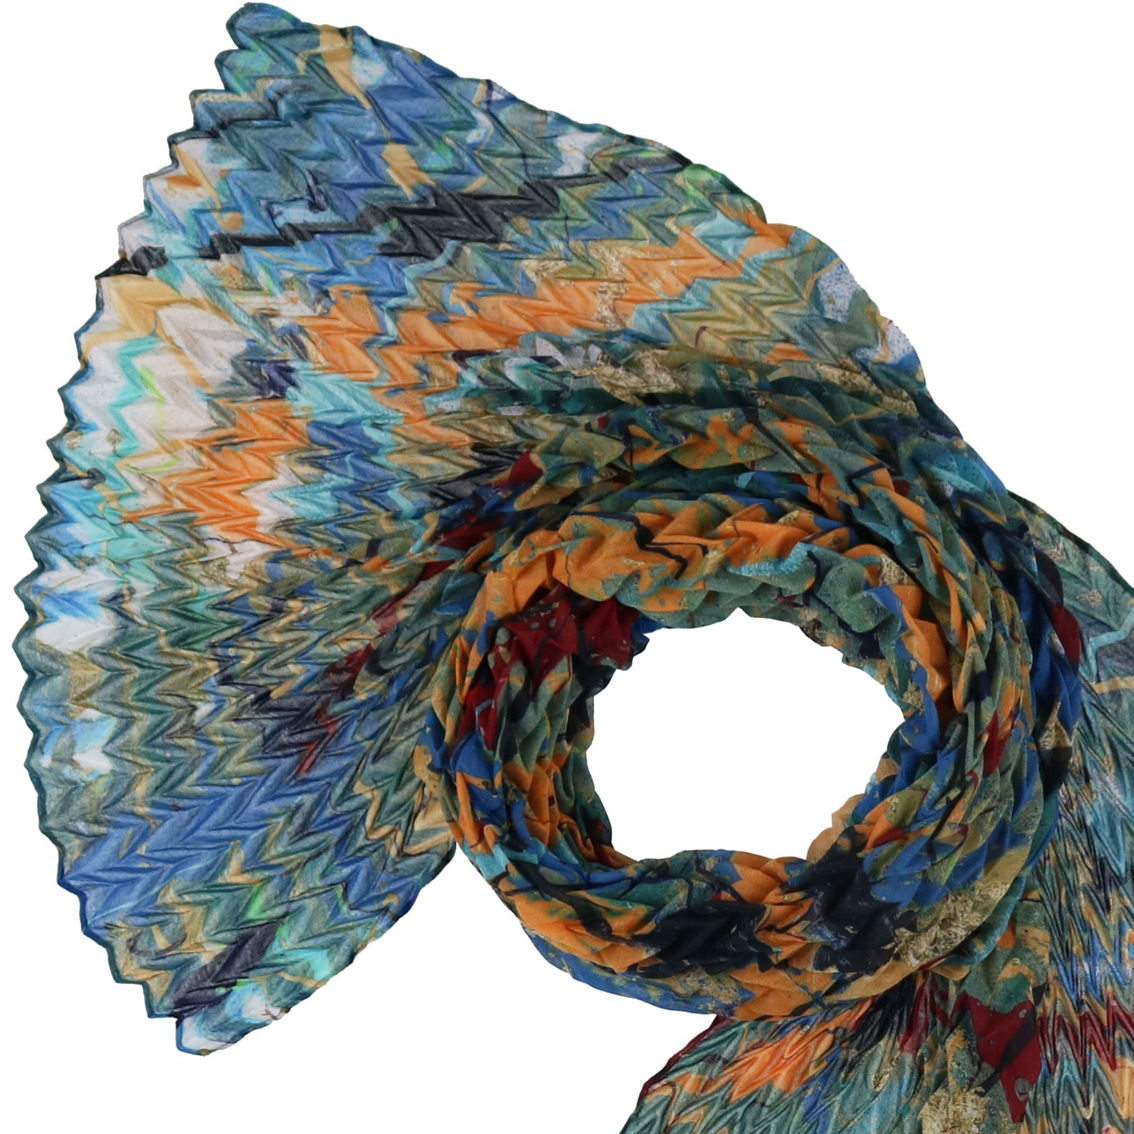 Jumper Maybach x FRAAS Hug Constellation Pleated Oblong Scarf - Image 2 of 2